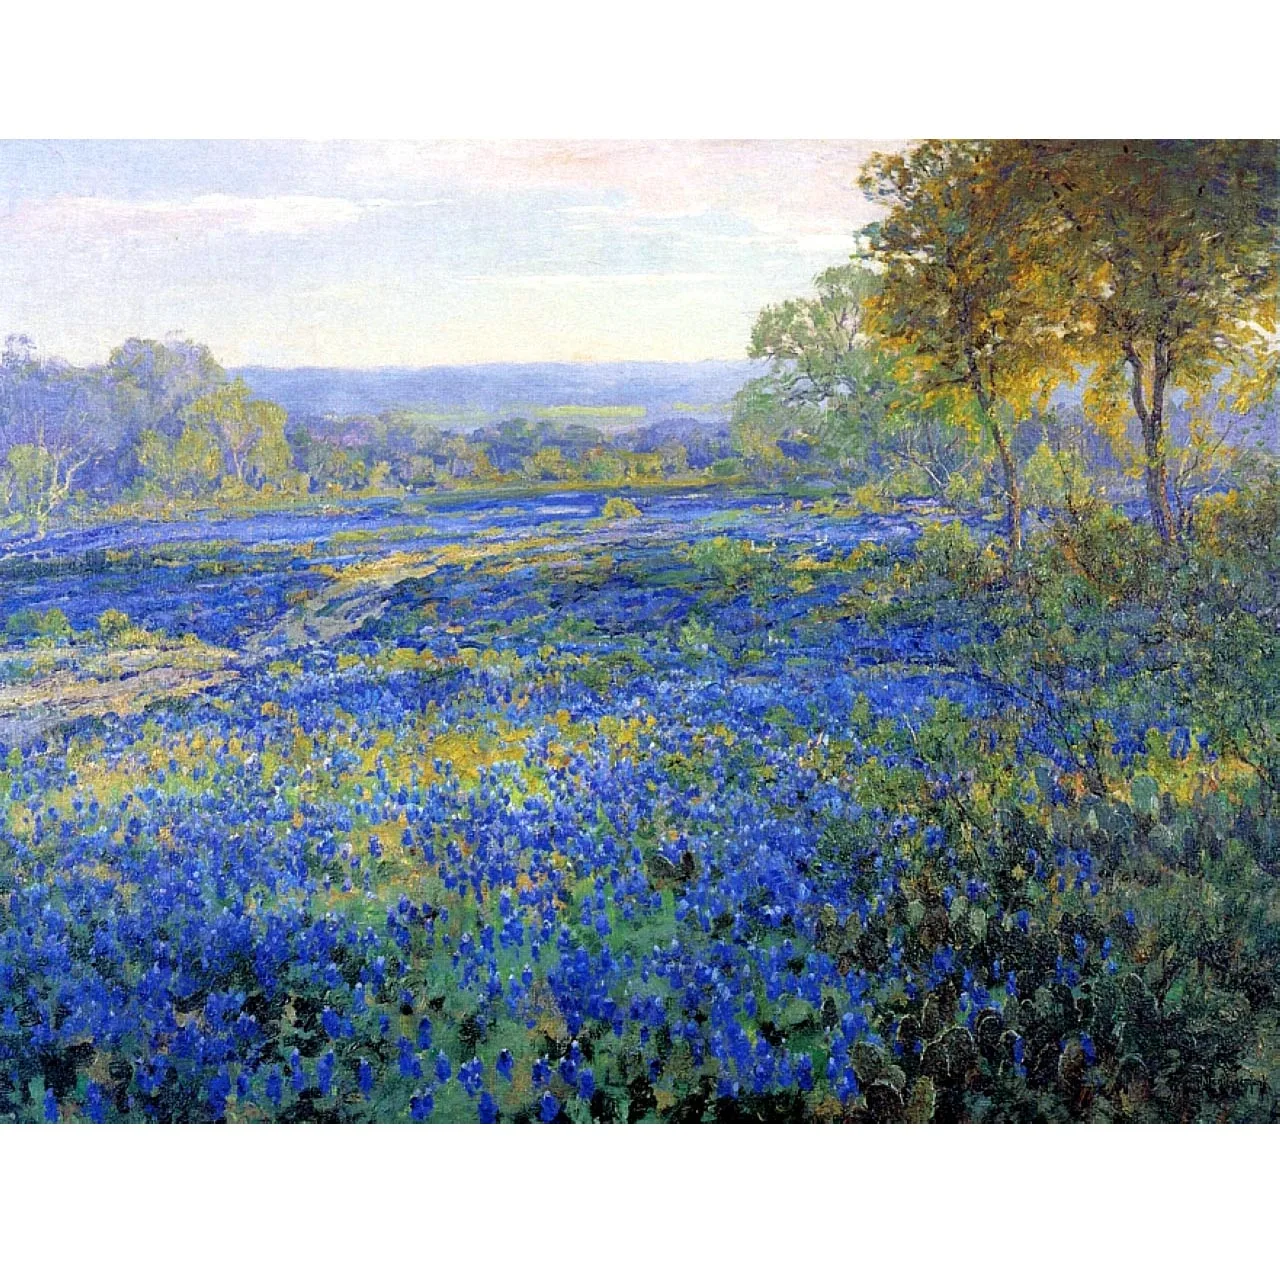 

Hand draw high quality reproduction of Fields of Bluebonnets by Robert Julian Onderdonk Landscape oil painting for home decor